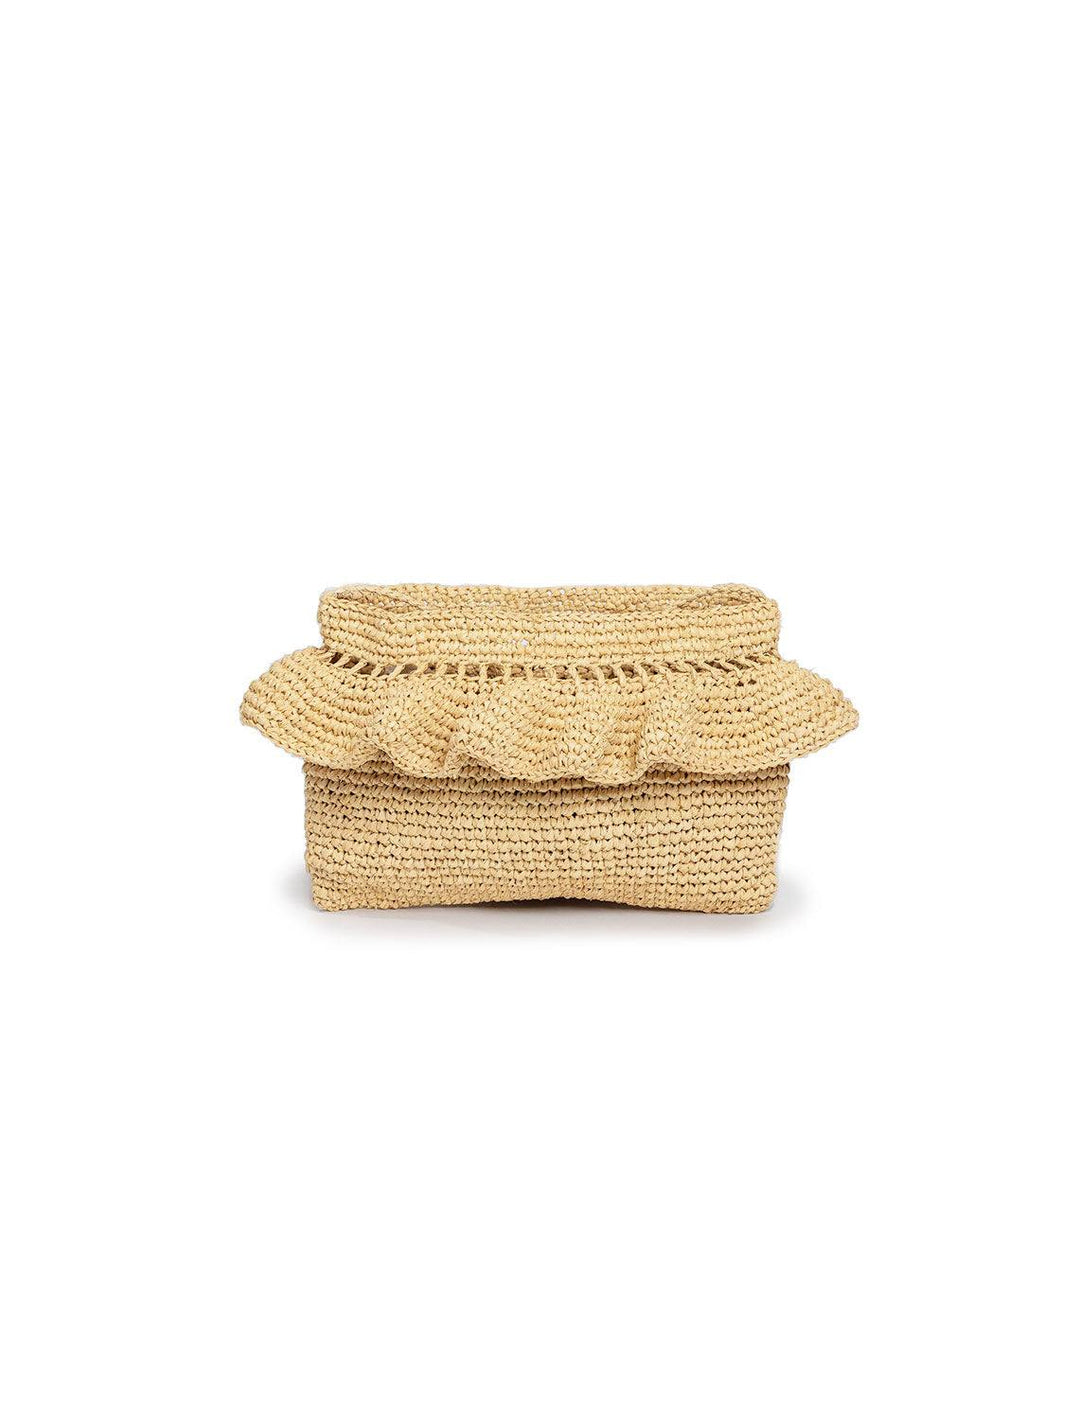 Front view of Hat Attack's ruffle clutch in natural.